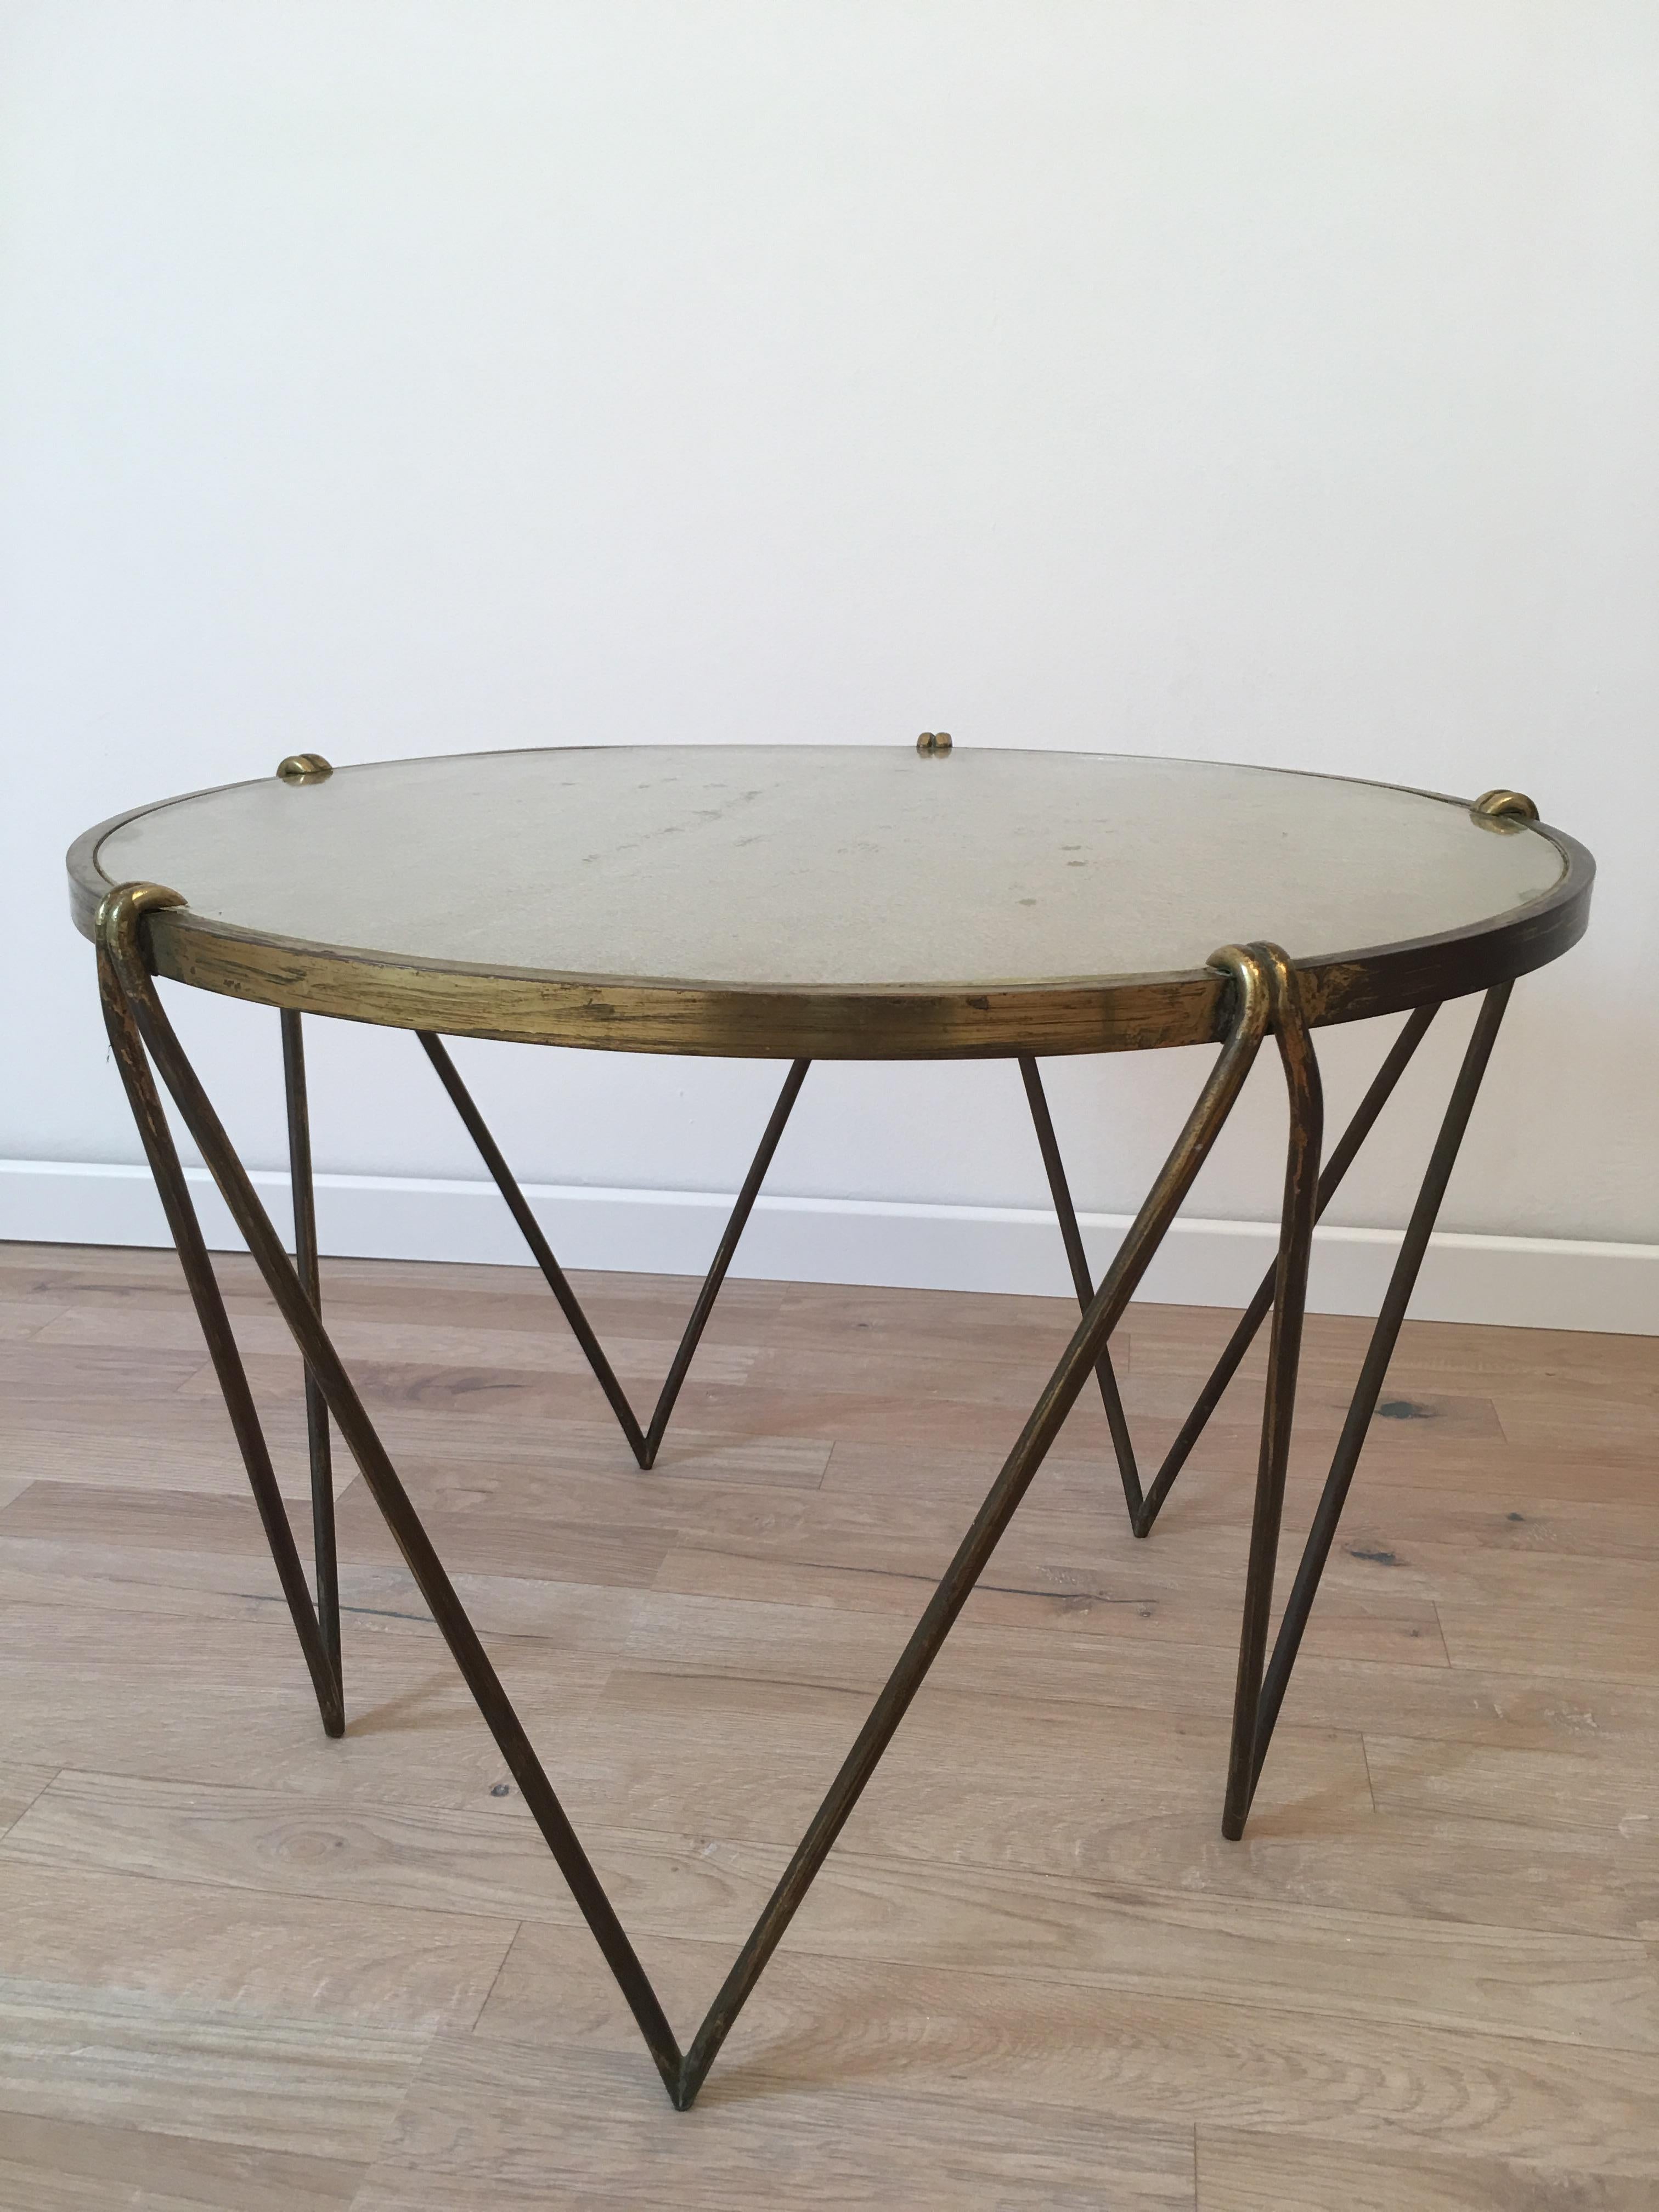 1950s French coffee table with an original Saint Gobain slab glass, supported by a gilt metal frame.
The geometrical shaped base is composed of five triangles. Perfect design and high quality of materials that reminds the work of Jean